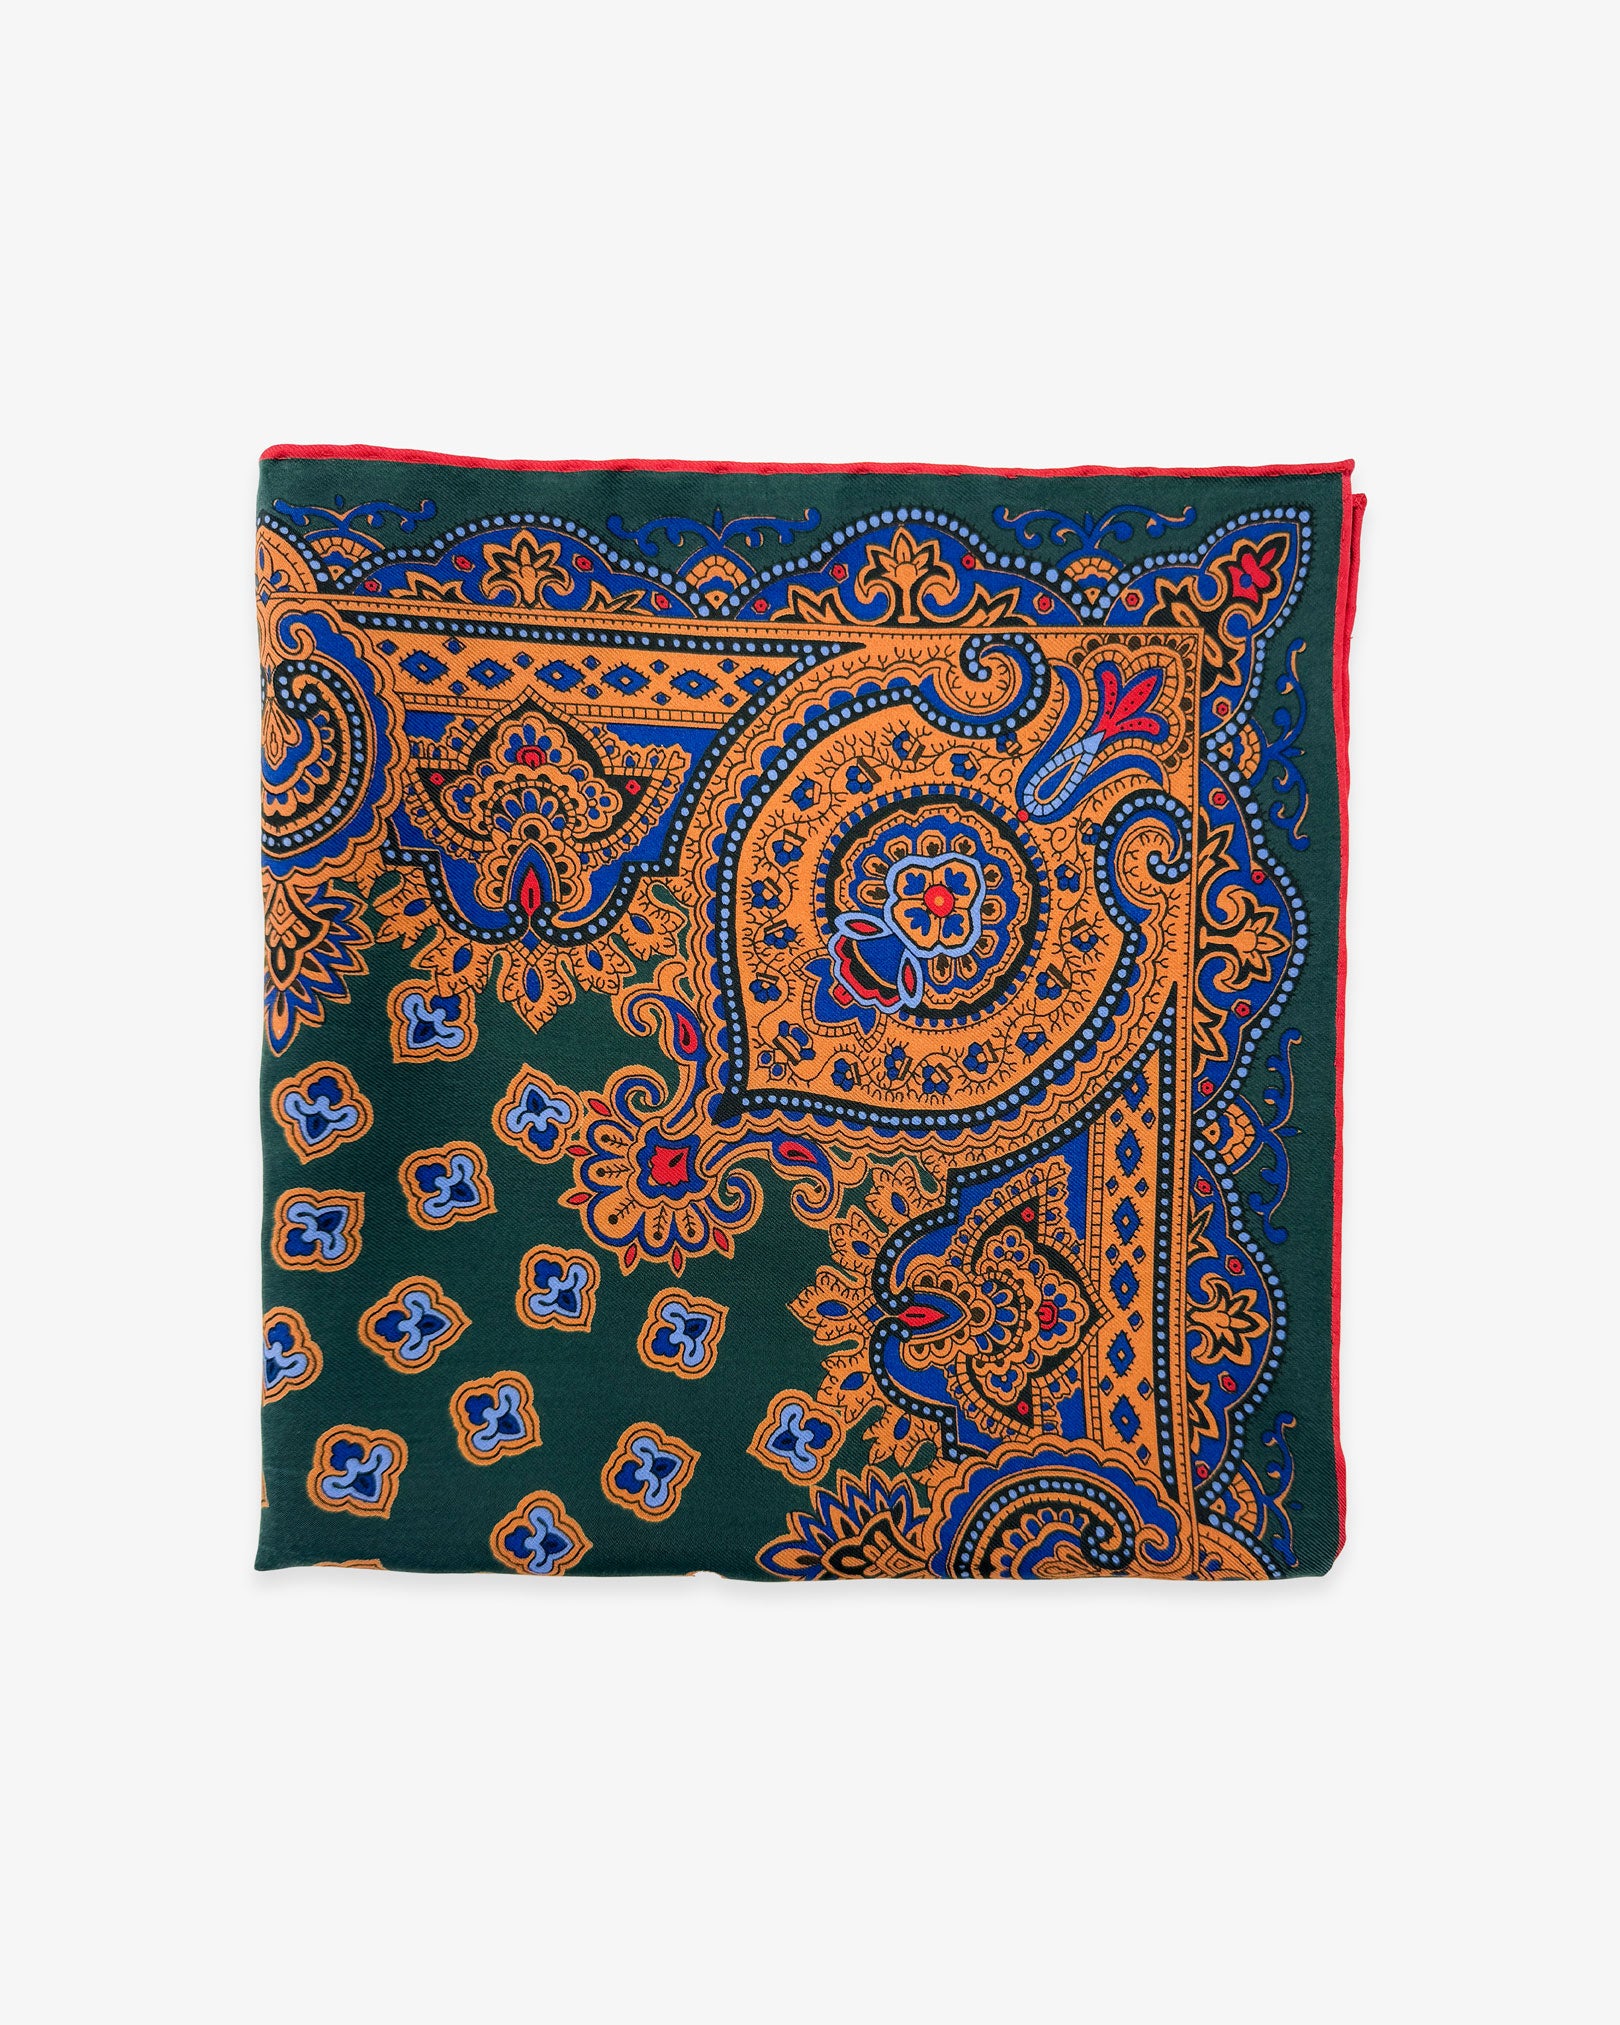 The 'Abingdon' pocket square from SOHO Scarves Madder silk collection. Folded into a quarter, showing the various traditional stylised forms in green, gold and blue.